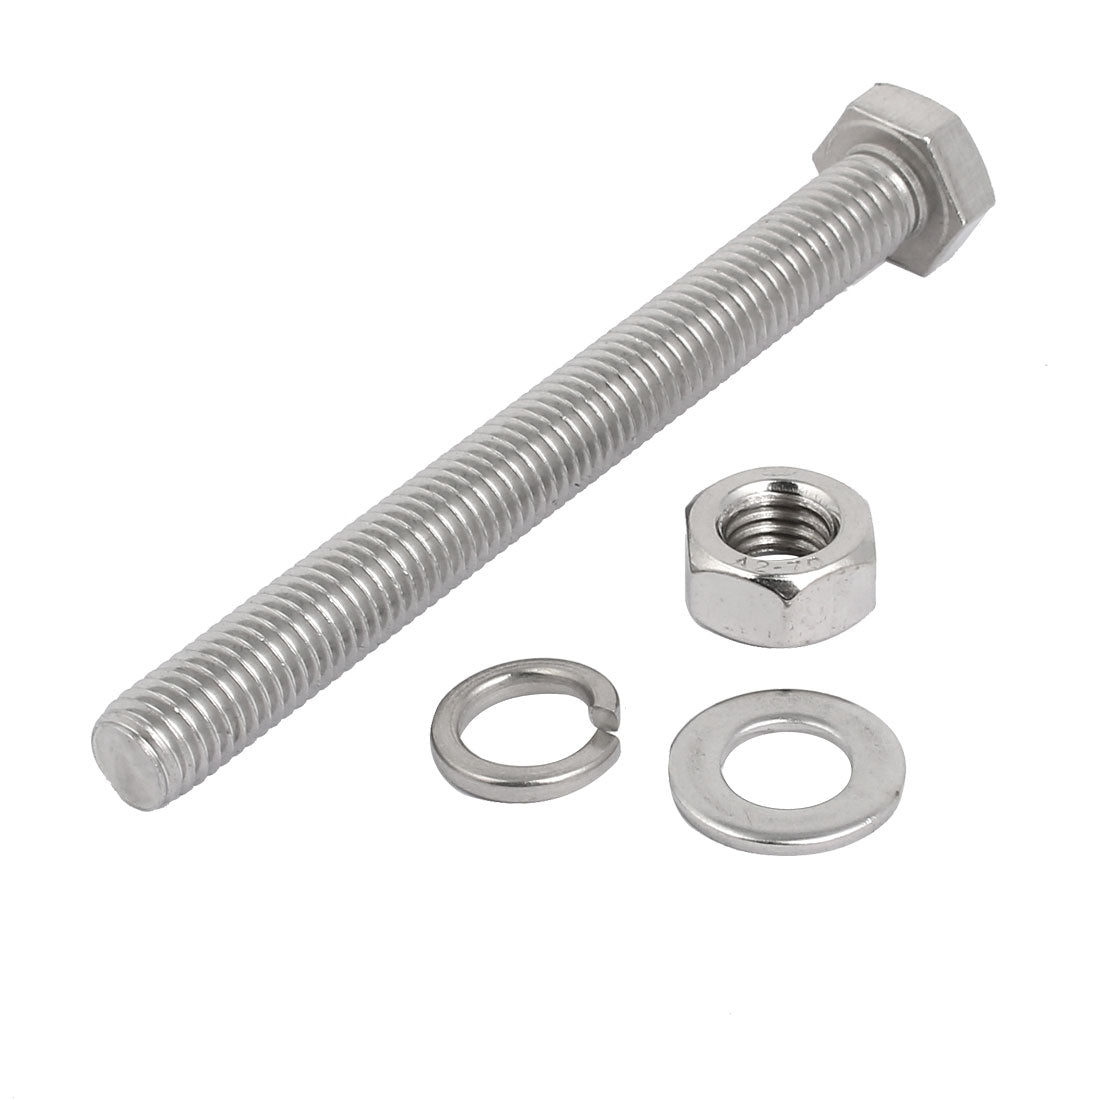 uxcell Uxcell 5 Set M10x100mm 304 Stainless Steel Hex Bolts w Nuts and Washers Assortment Kit